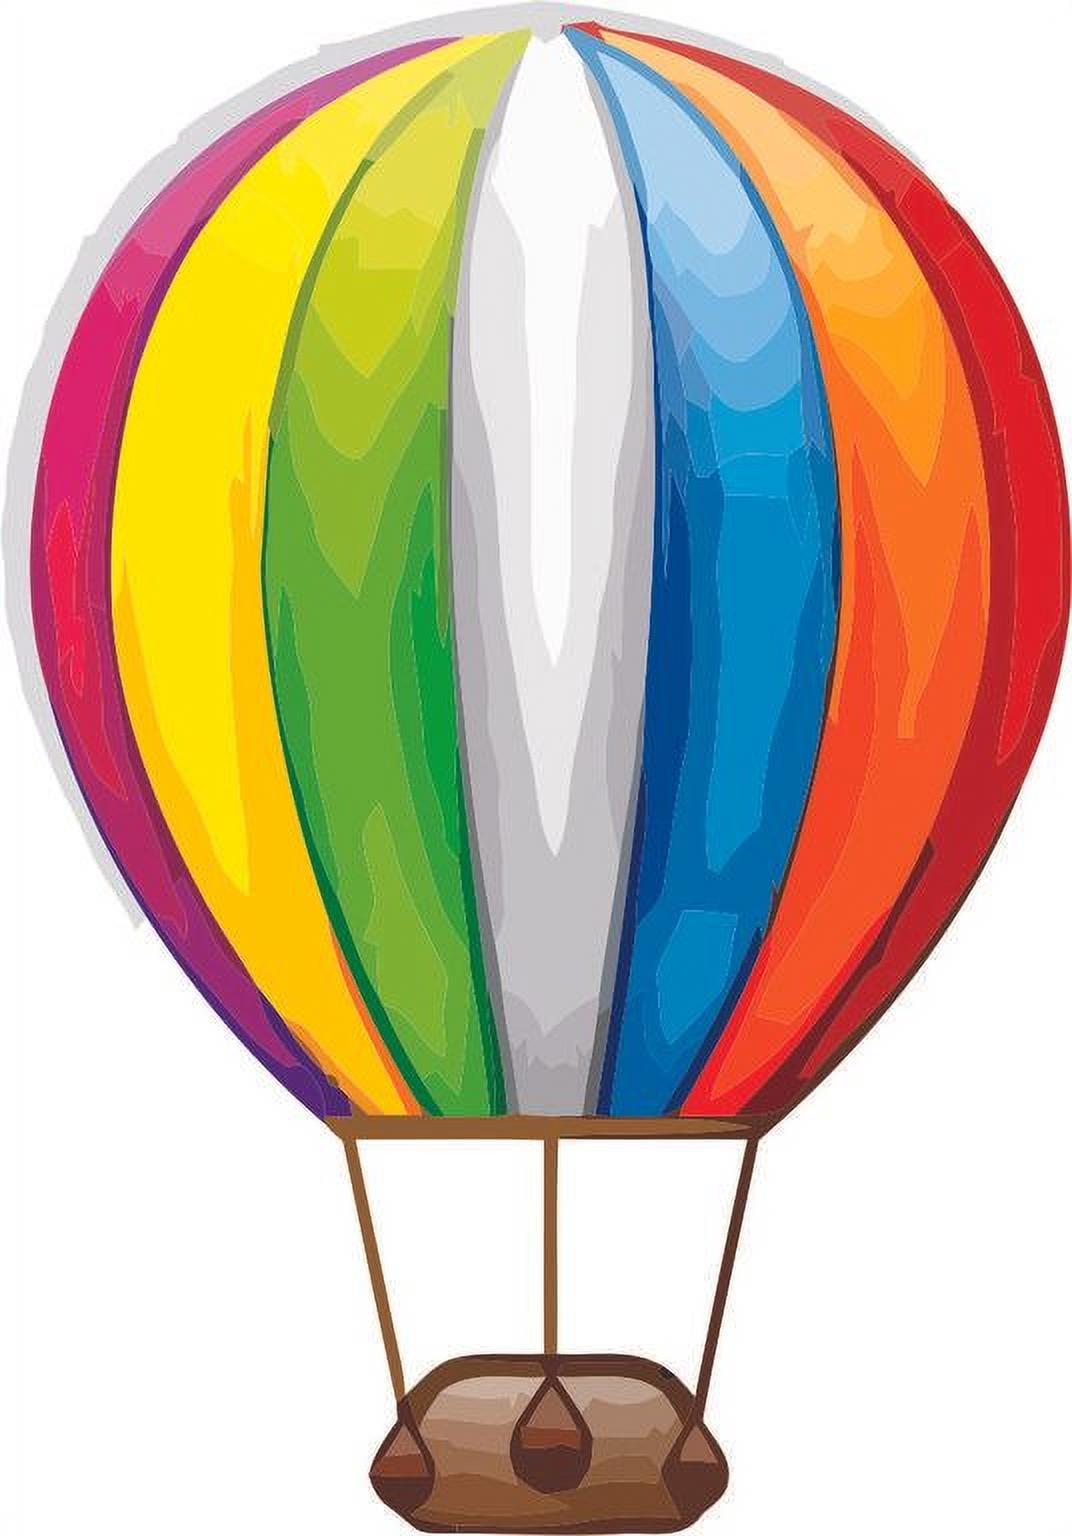 Rainbow Hot Air Ballon Kids Wall Stickers Wall Decals Peel and Stick Removable Wall Stickers for Nursery Living Room Sofa TV High Quality Decal Bumper Sticker Vinyl 20x10 inch -